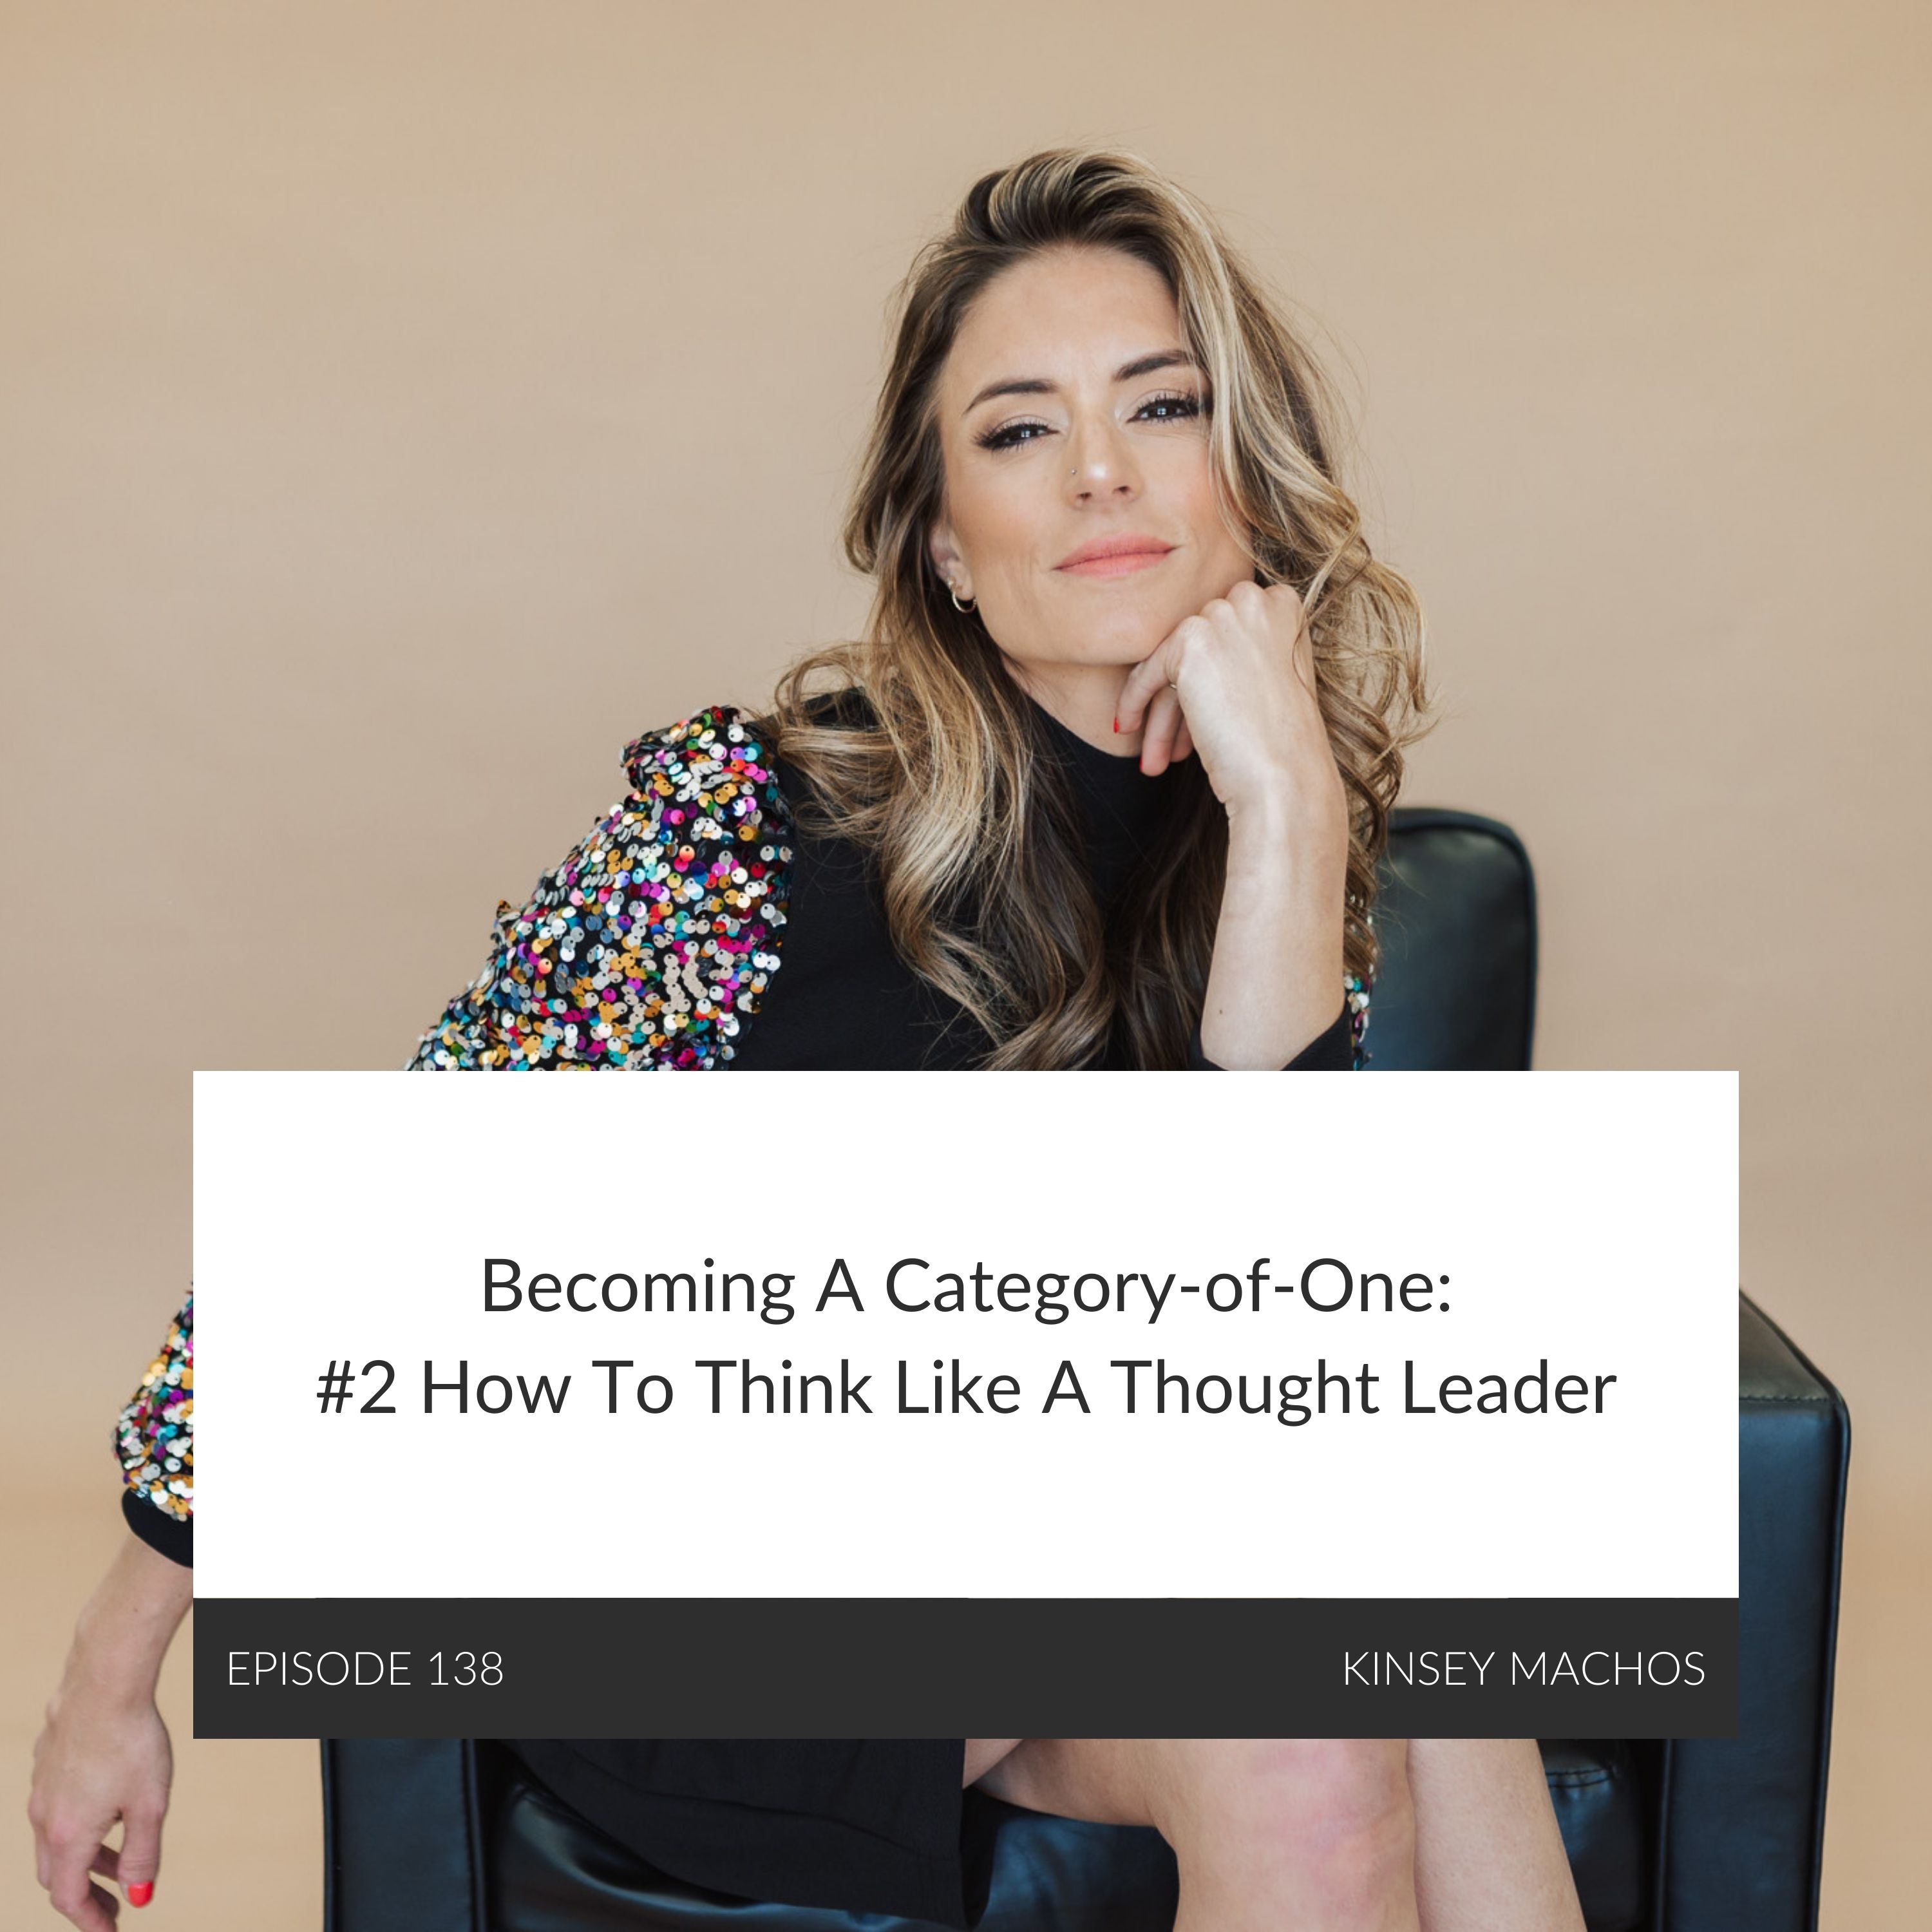 Becoming A Category-of-One #2: How To Think Like A Thought Leader